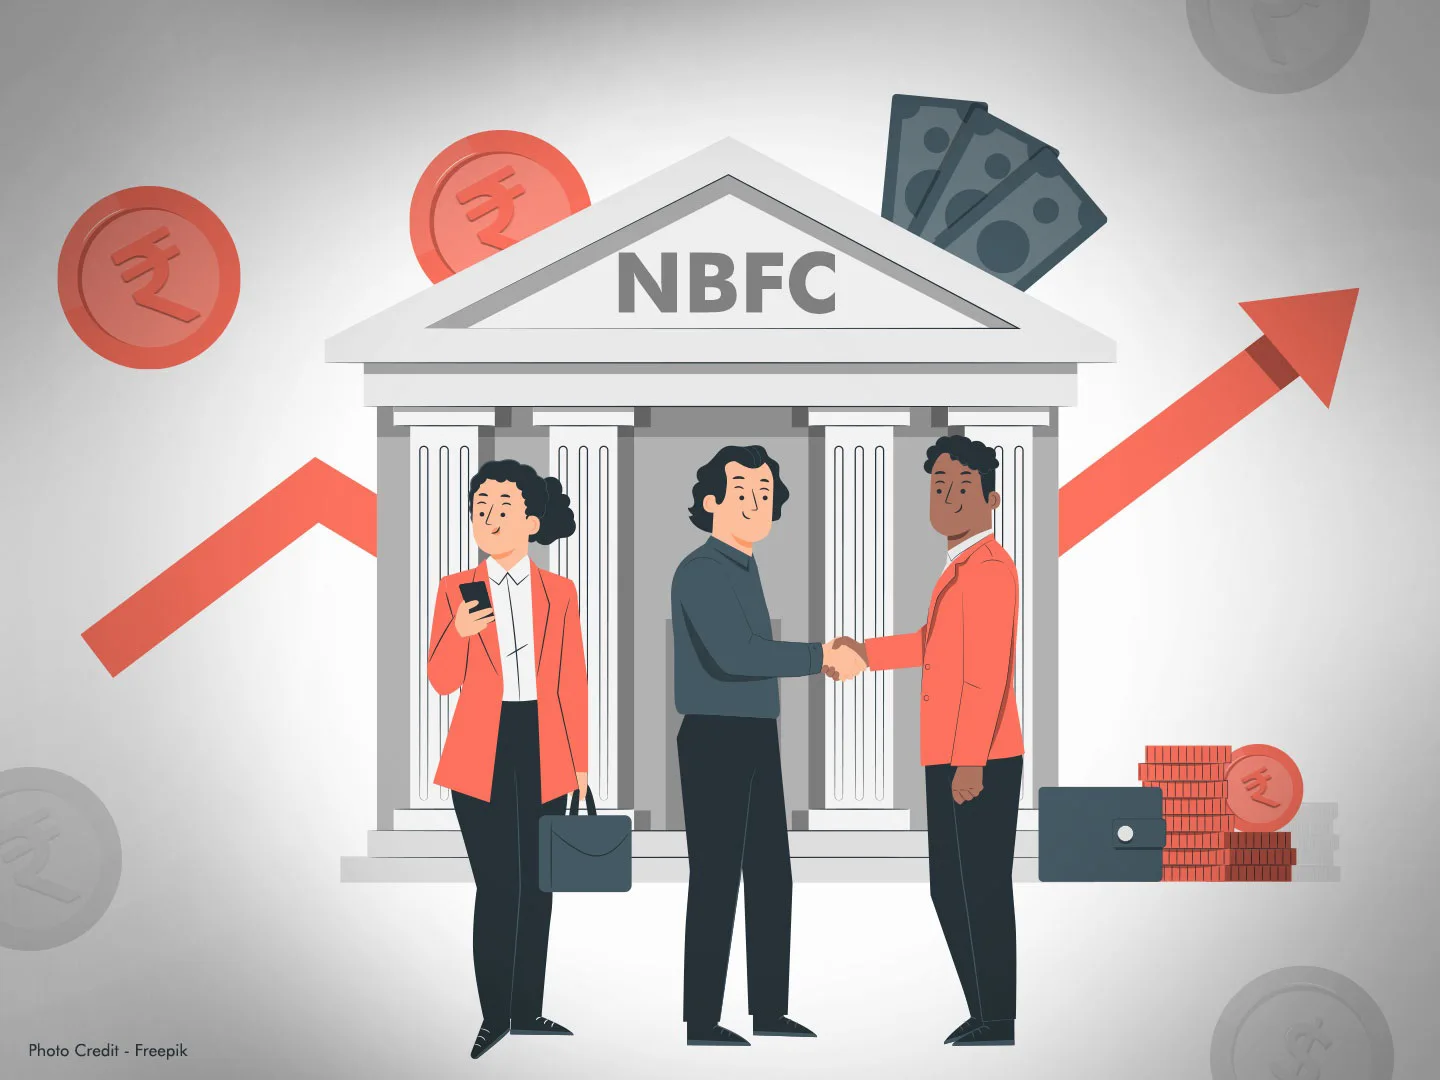 2023 Marks Pivotal Year of Growth for Non-Banking Financial Companies (NBFCs)